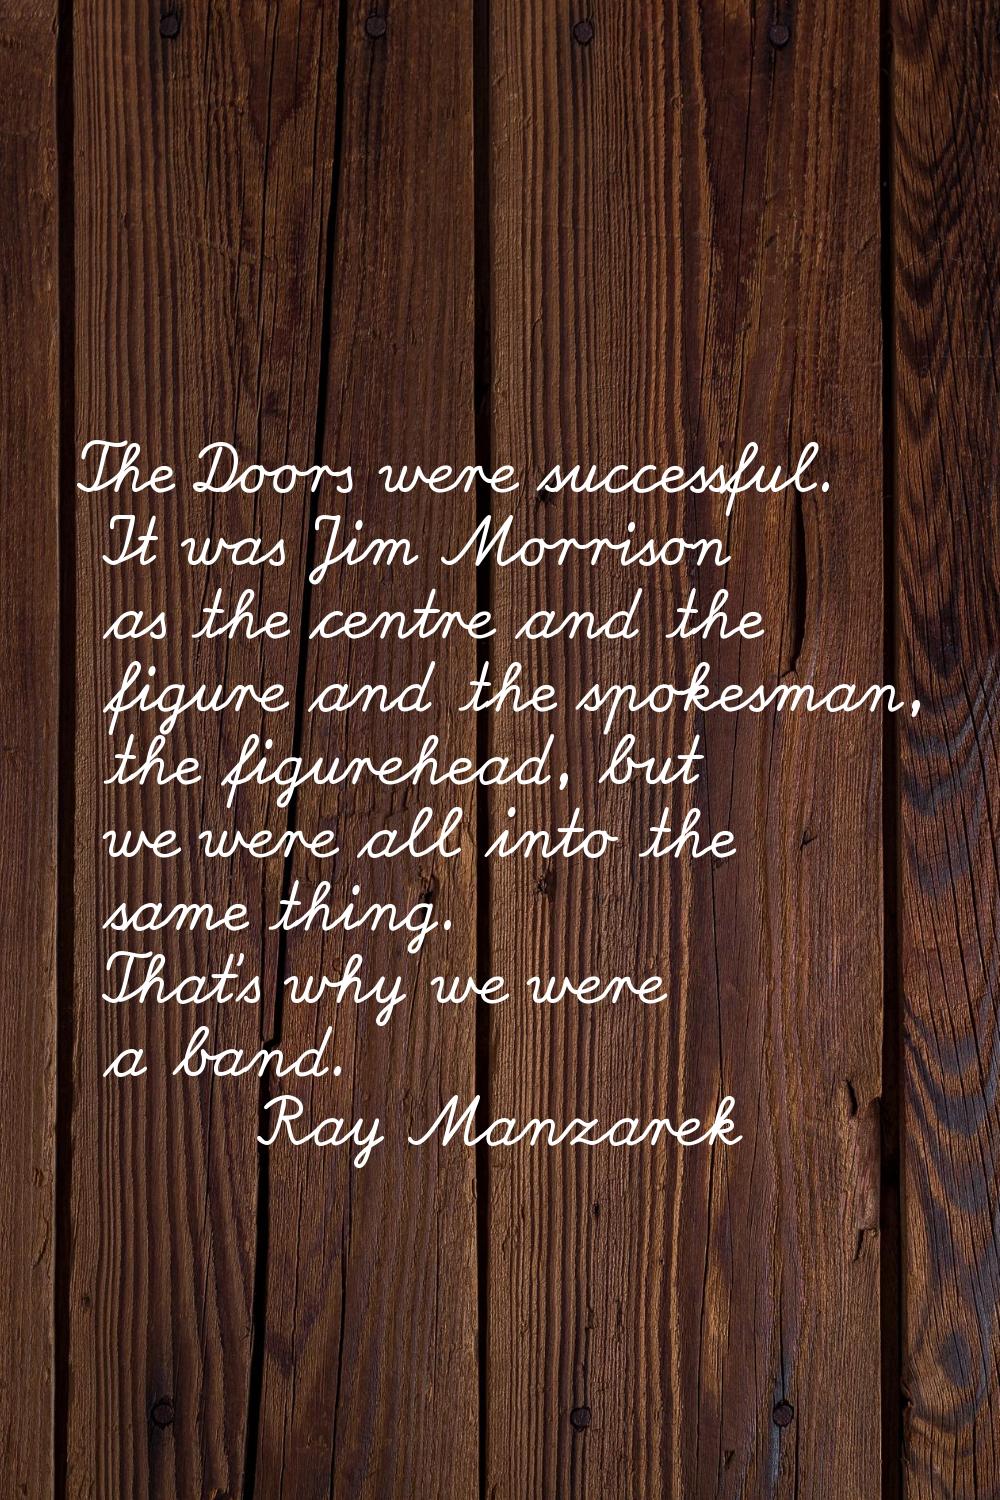 The Doors were successful. It was Jim Morrison as the centre and the figure and the spokesman, the 